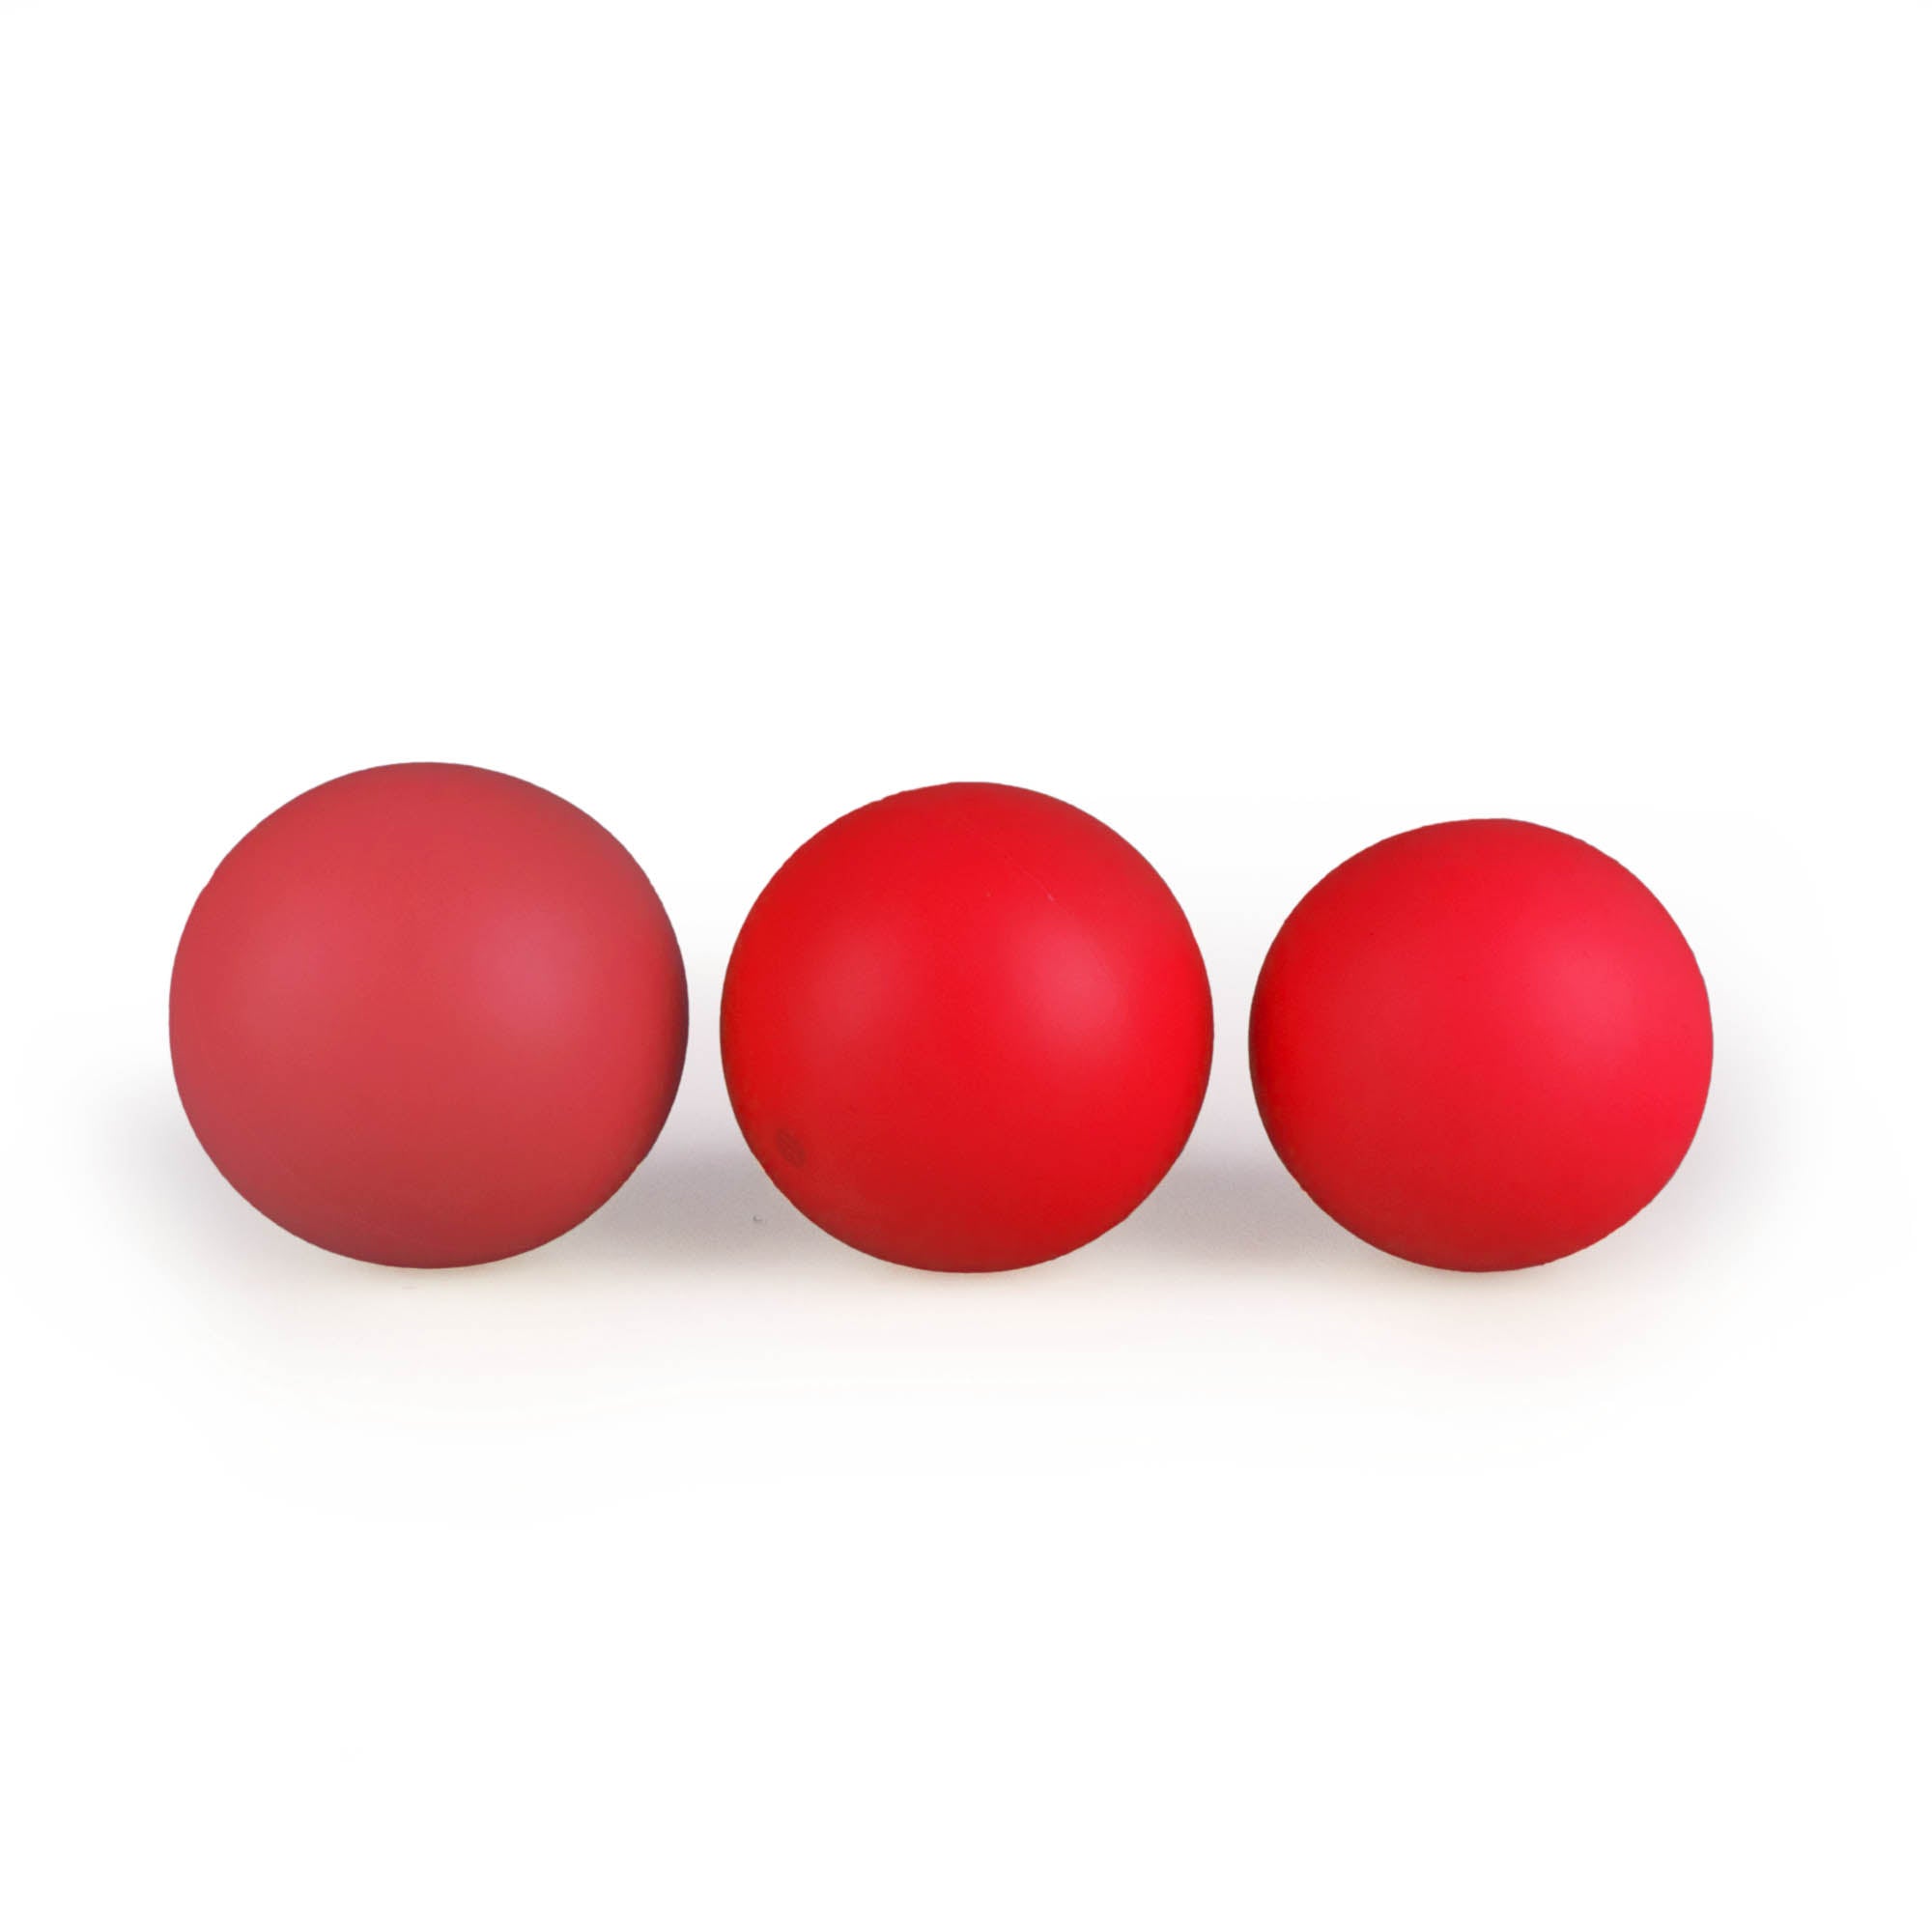 MMX juggling ball size comparison red